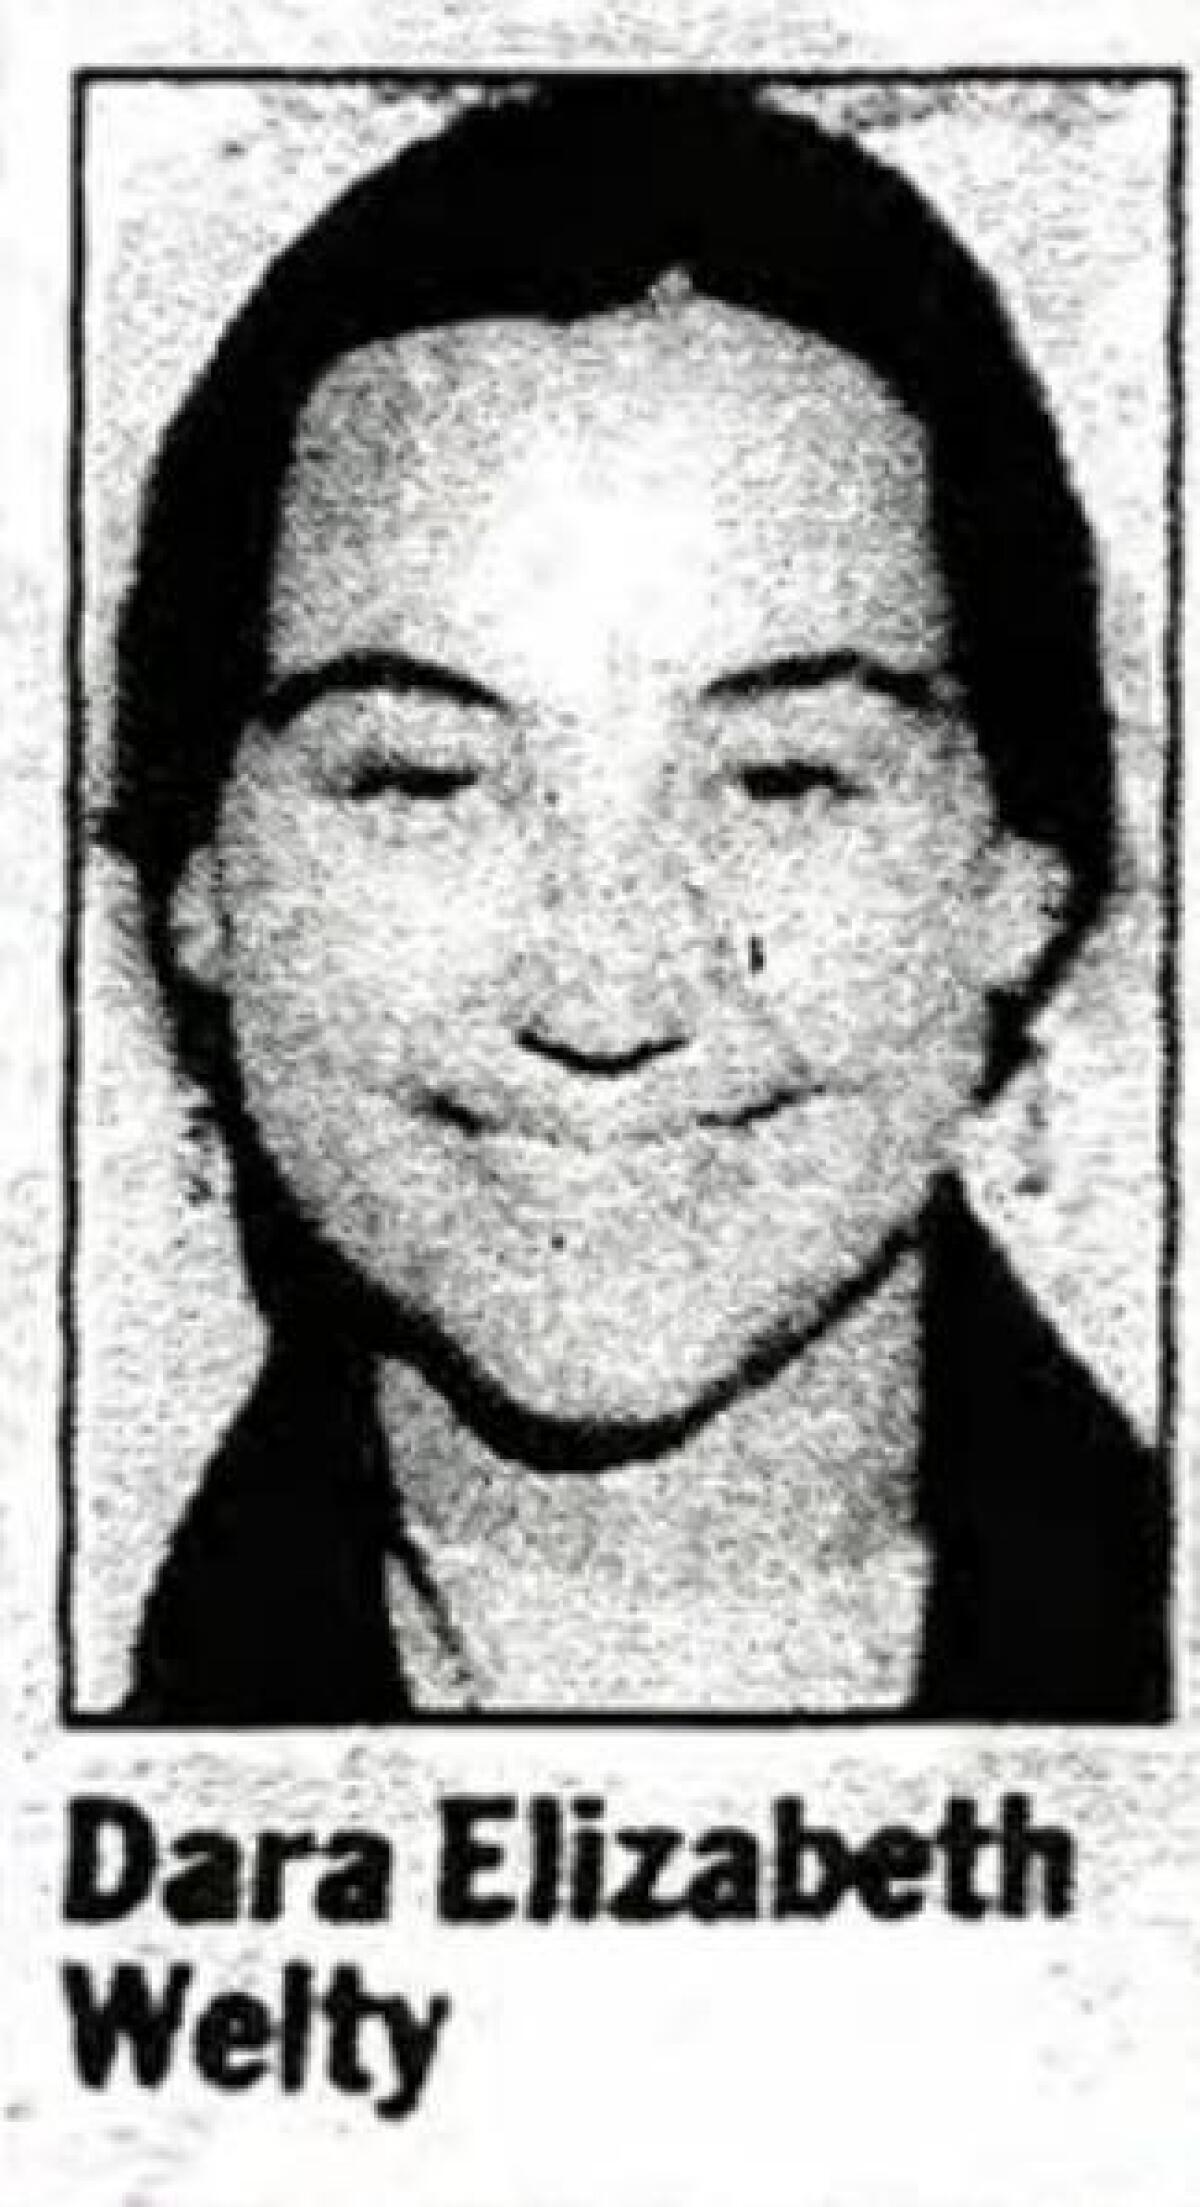 Obituary photo, from U-T archive